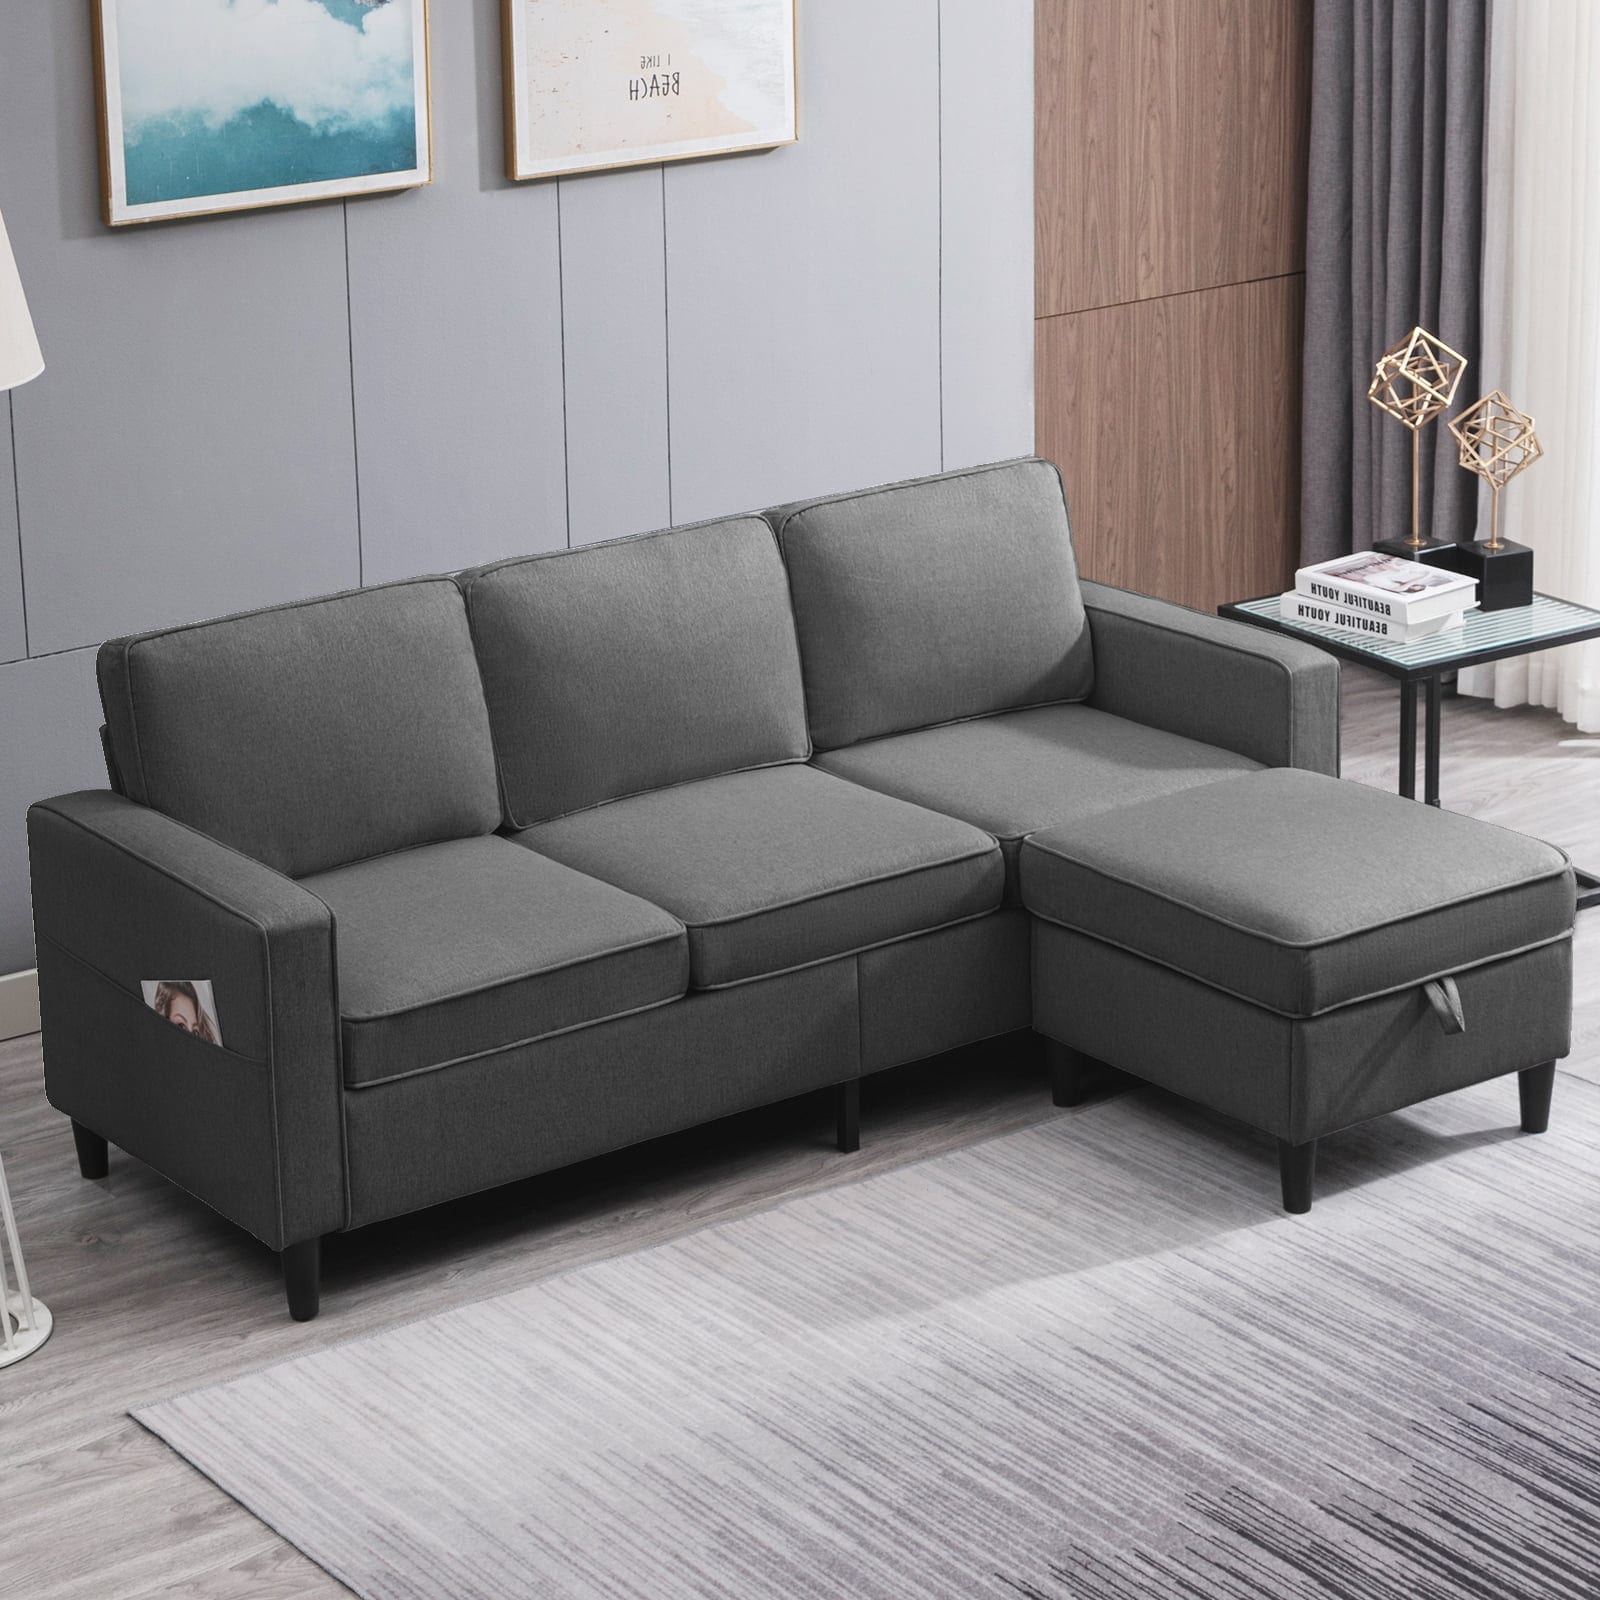 Mixoy 90w Convertible L-shaped Sectional Couch With Storage Ottoman - 89.76in*55.12in*17.71in